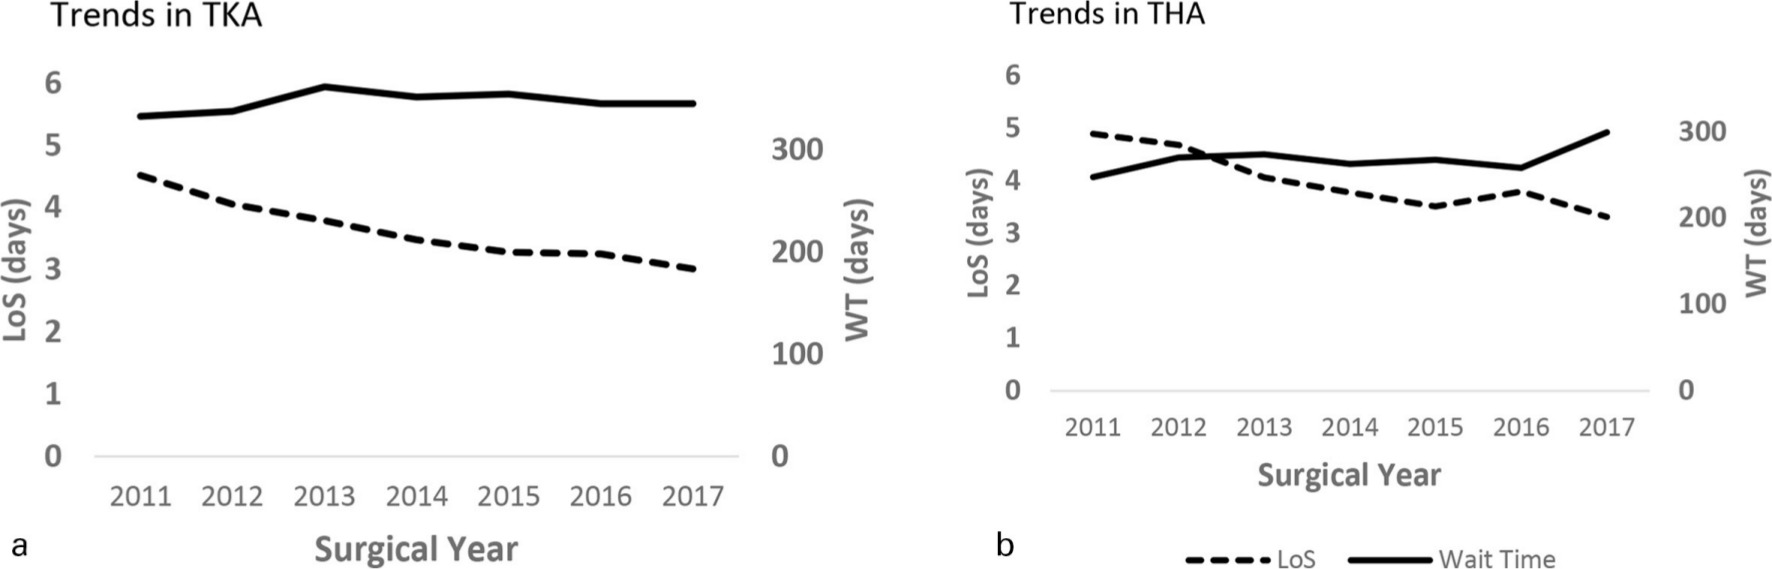 Fig. 1 
            Trends in wait time (WT) and acute hospital length of stay (LoS). Trends are shown for a) total knee arthroplasty (TKA) and b) total hip arthroplasty (THA) from 2011 to 2017.
          